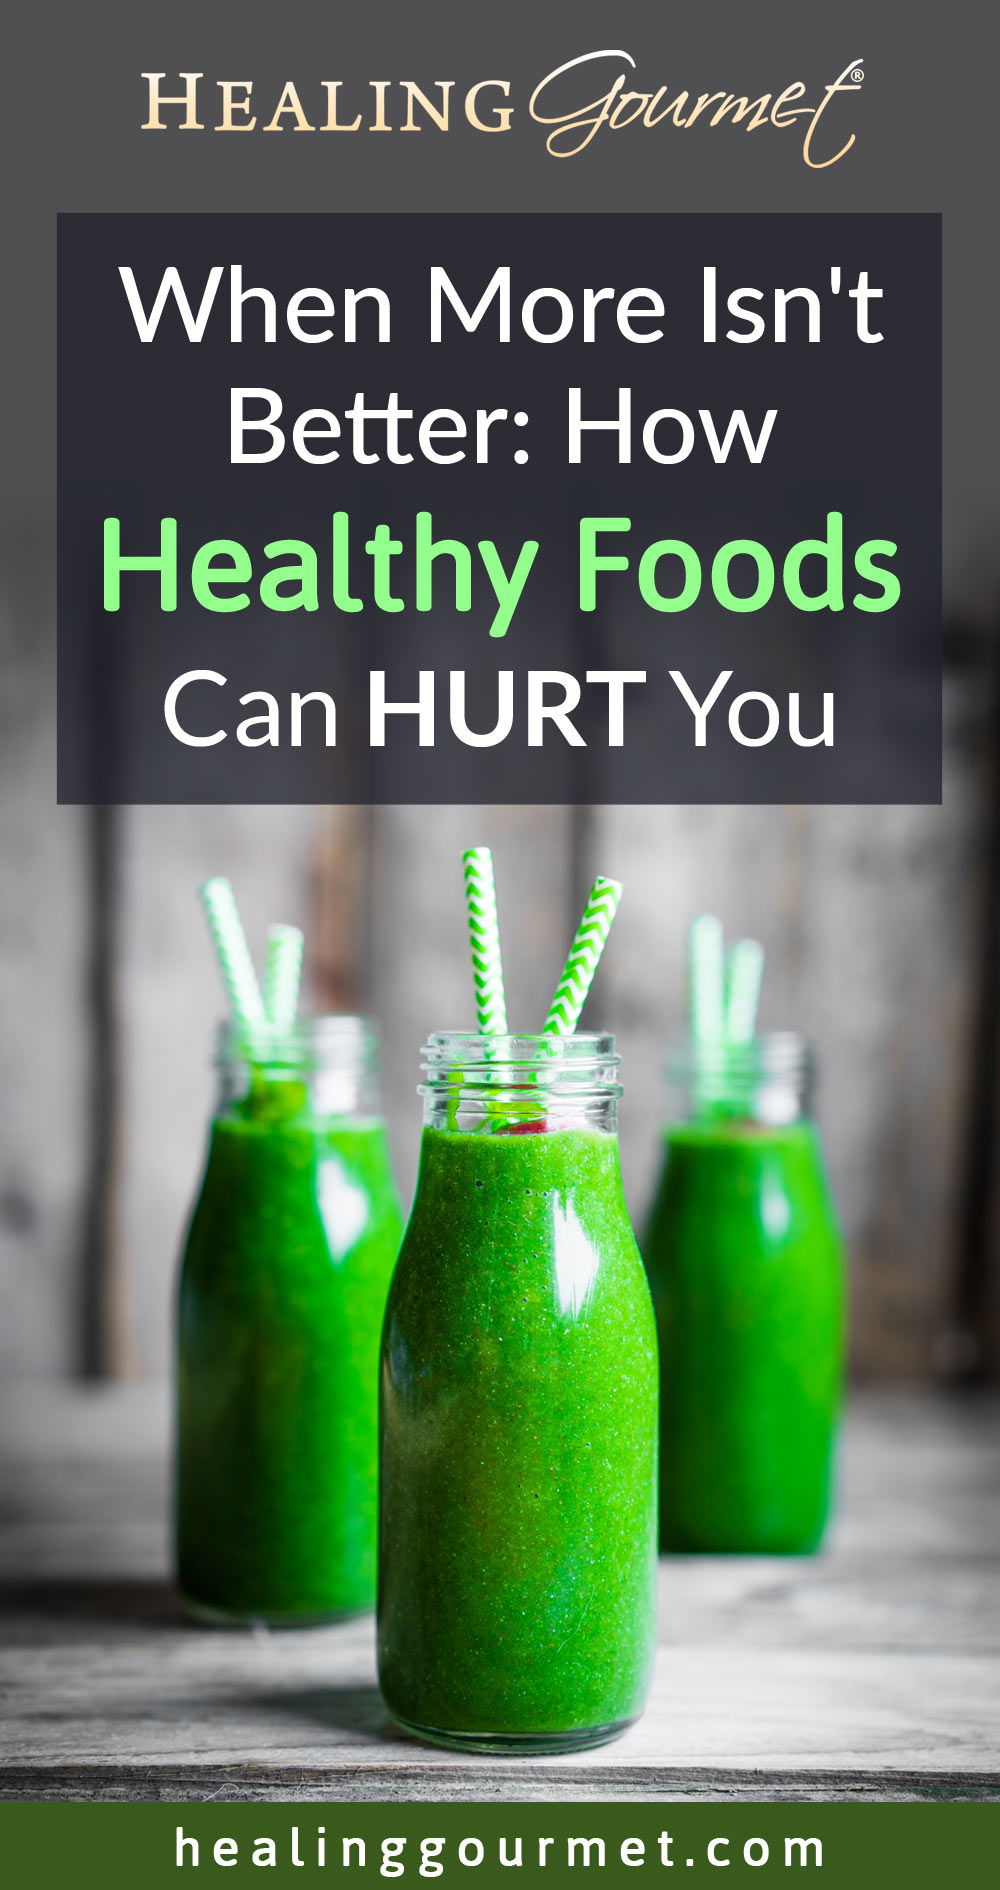 Harm In Excess: When “Healthy” Foods & Supplements Cause Disease